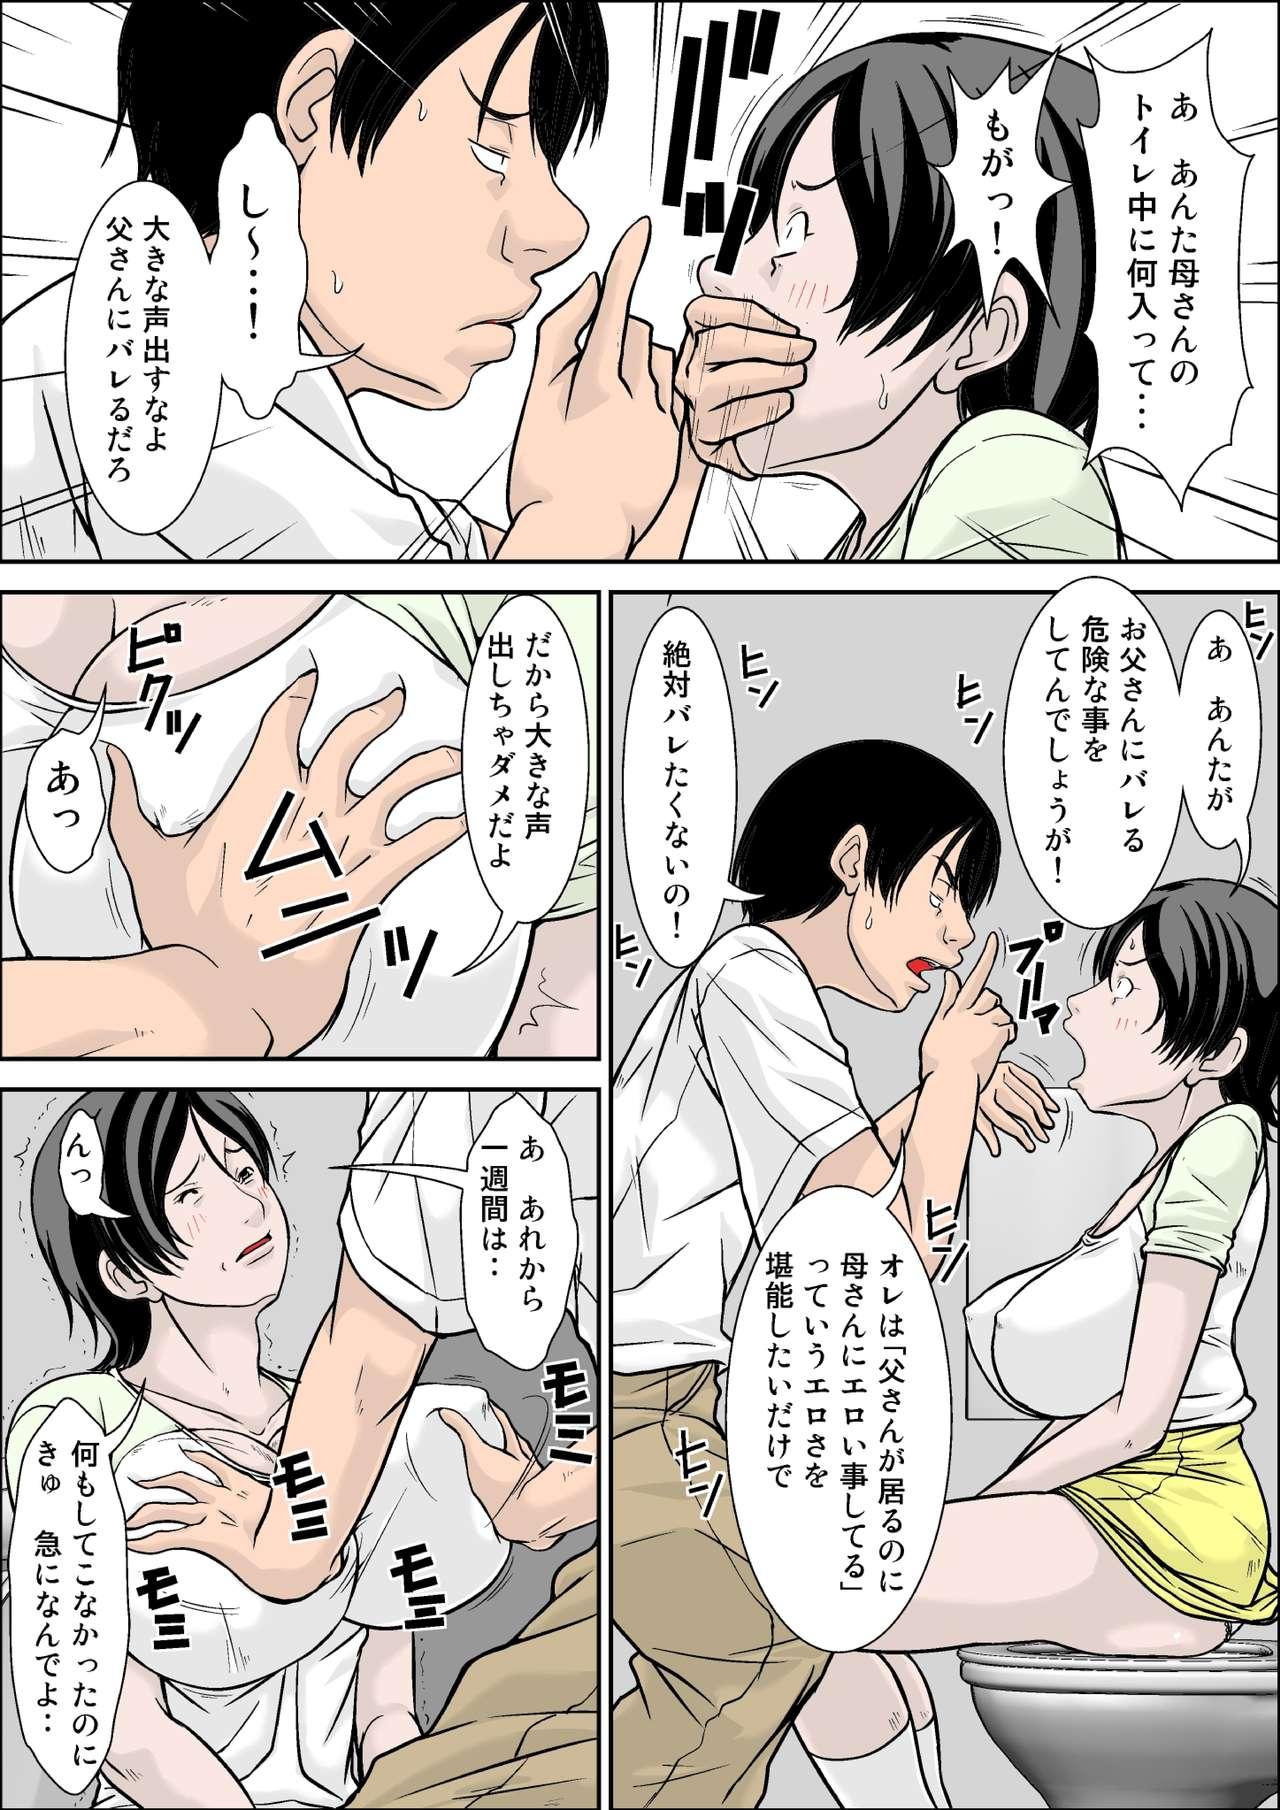 Hey! It is said that I urge you mother and will do what! ... mother Hatsujou - 1st part 20